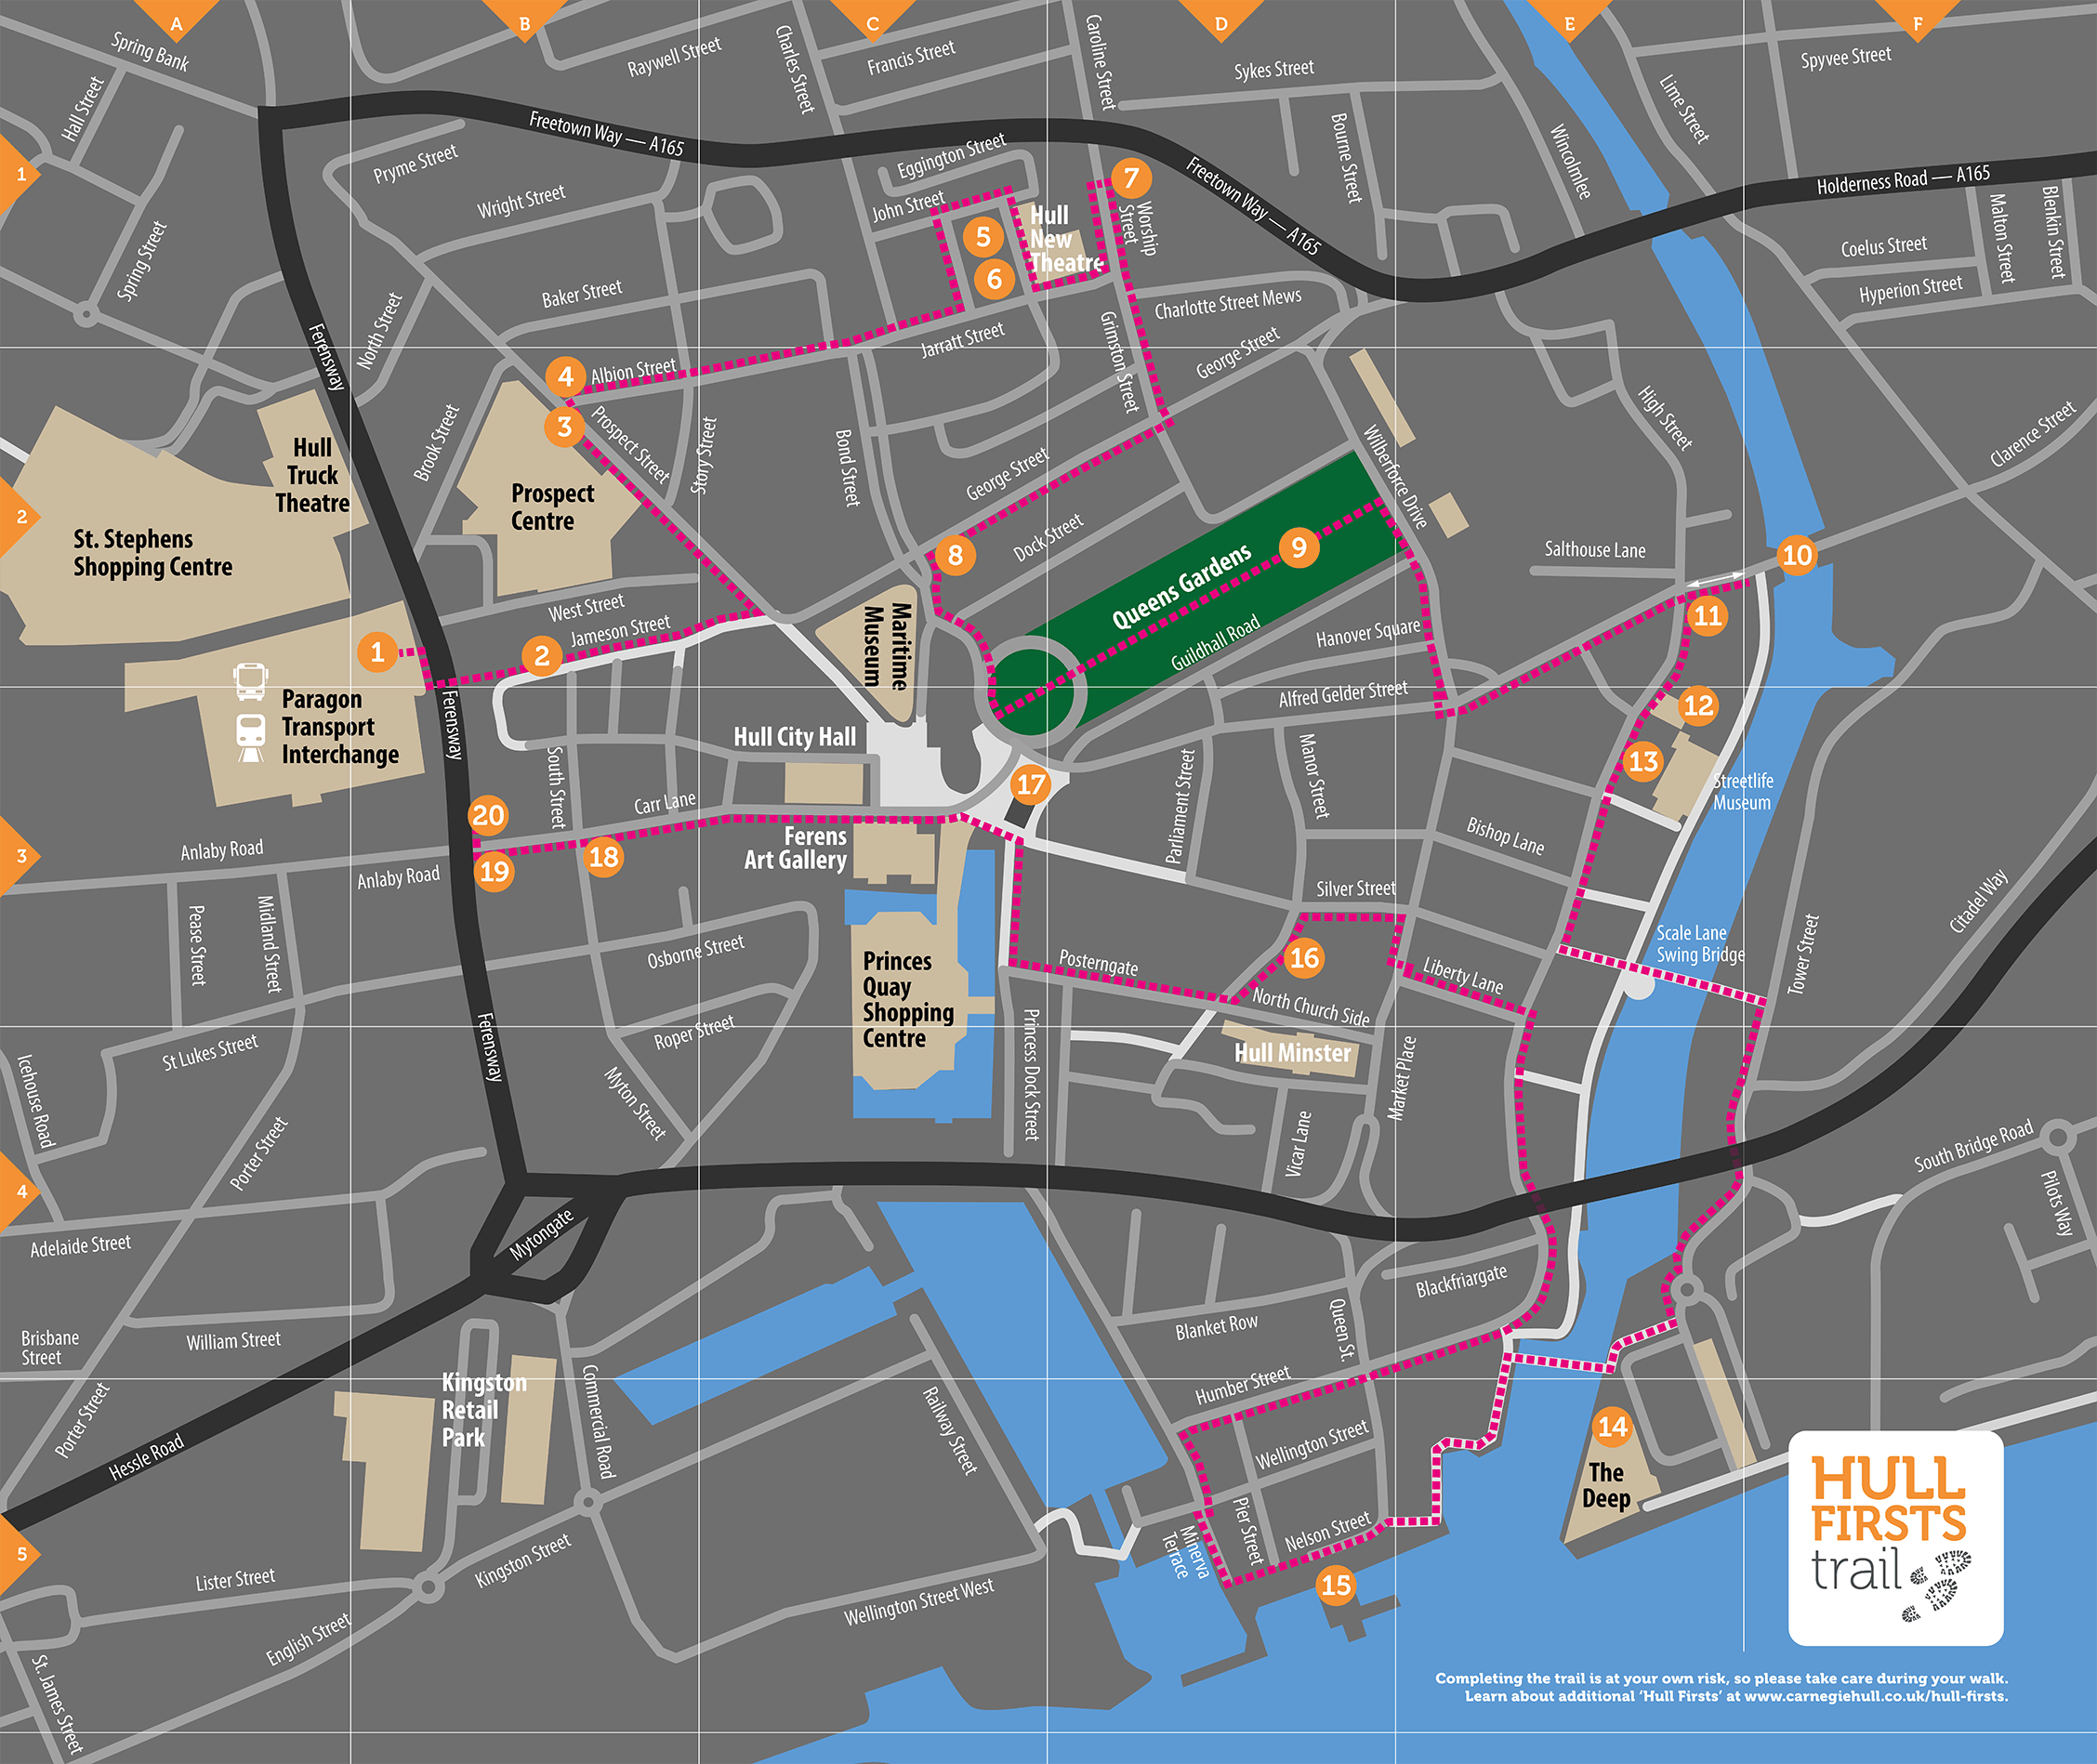 Hull Firsts Trail – overview map